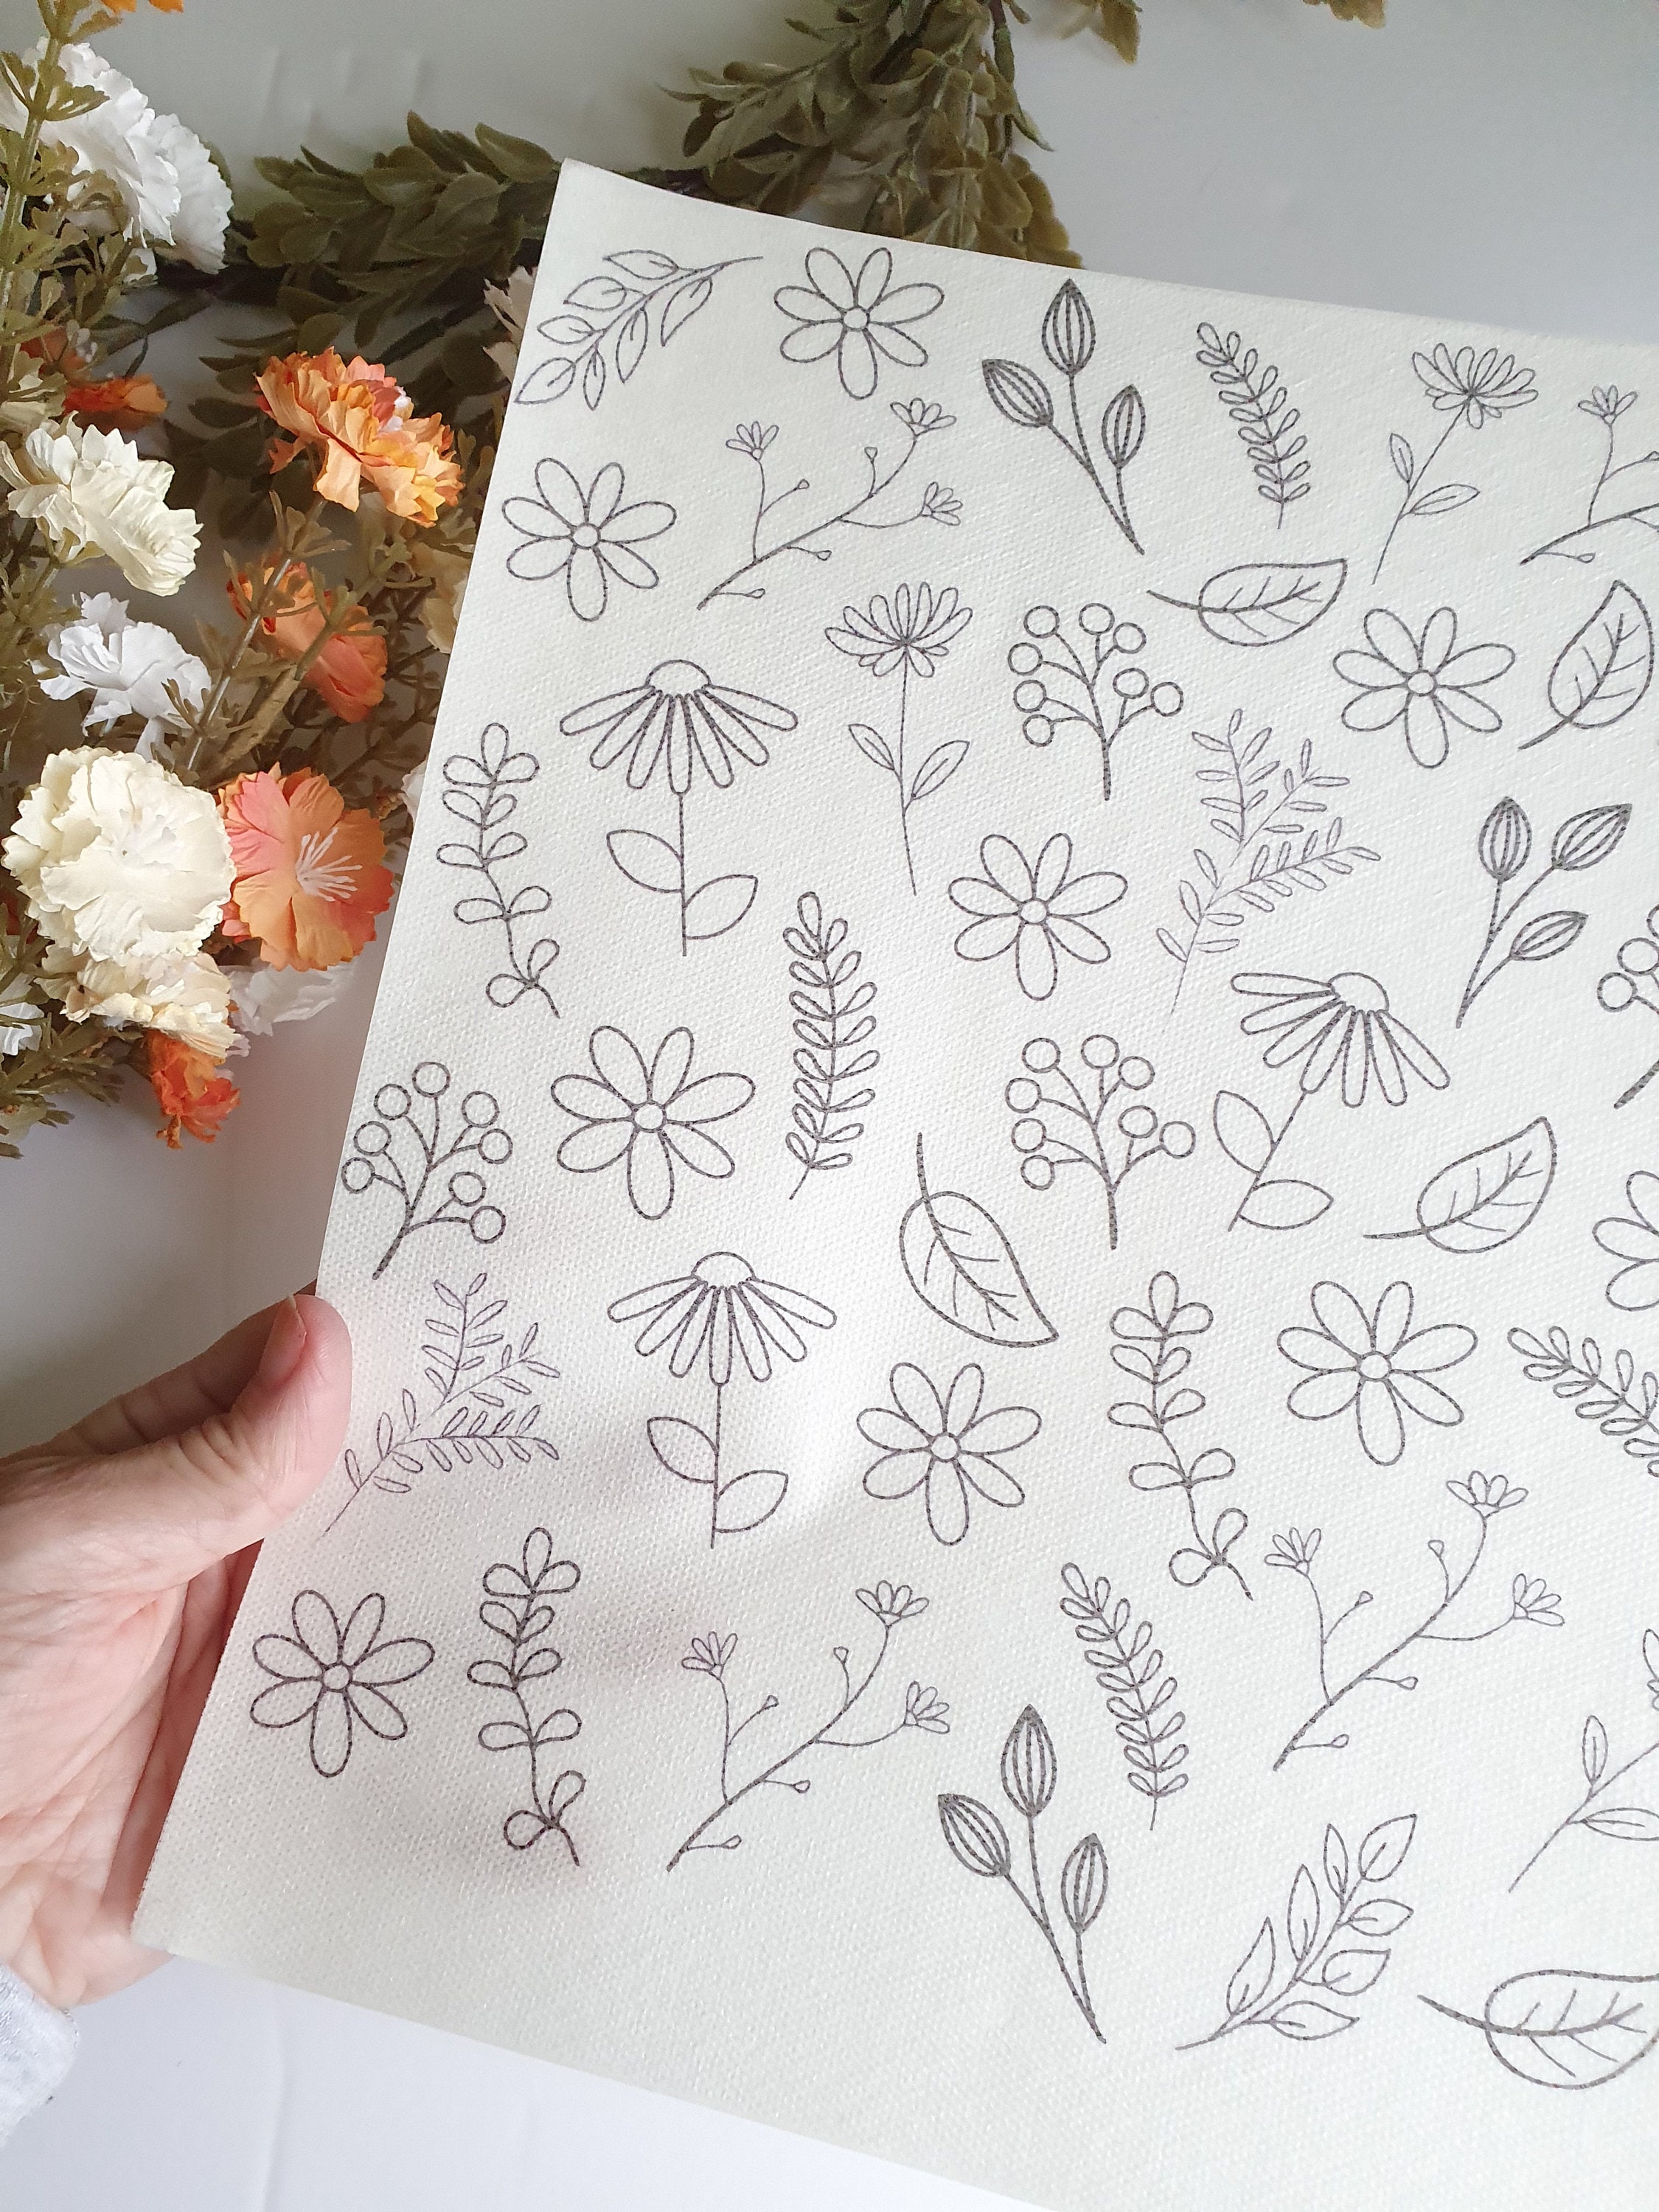 water soluble embroidery stencil paper｜TikTok Search